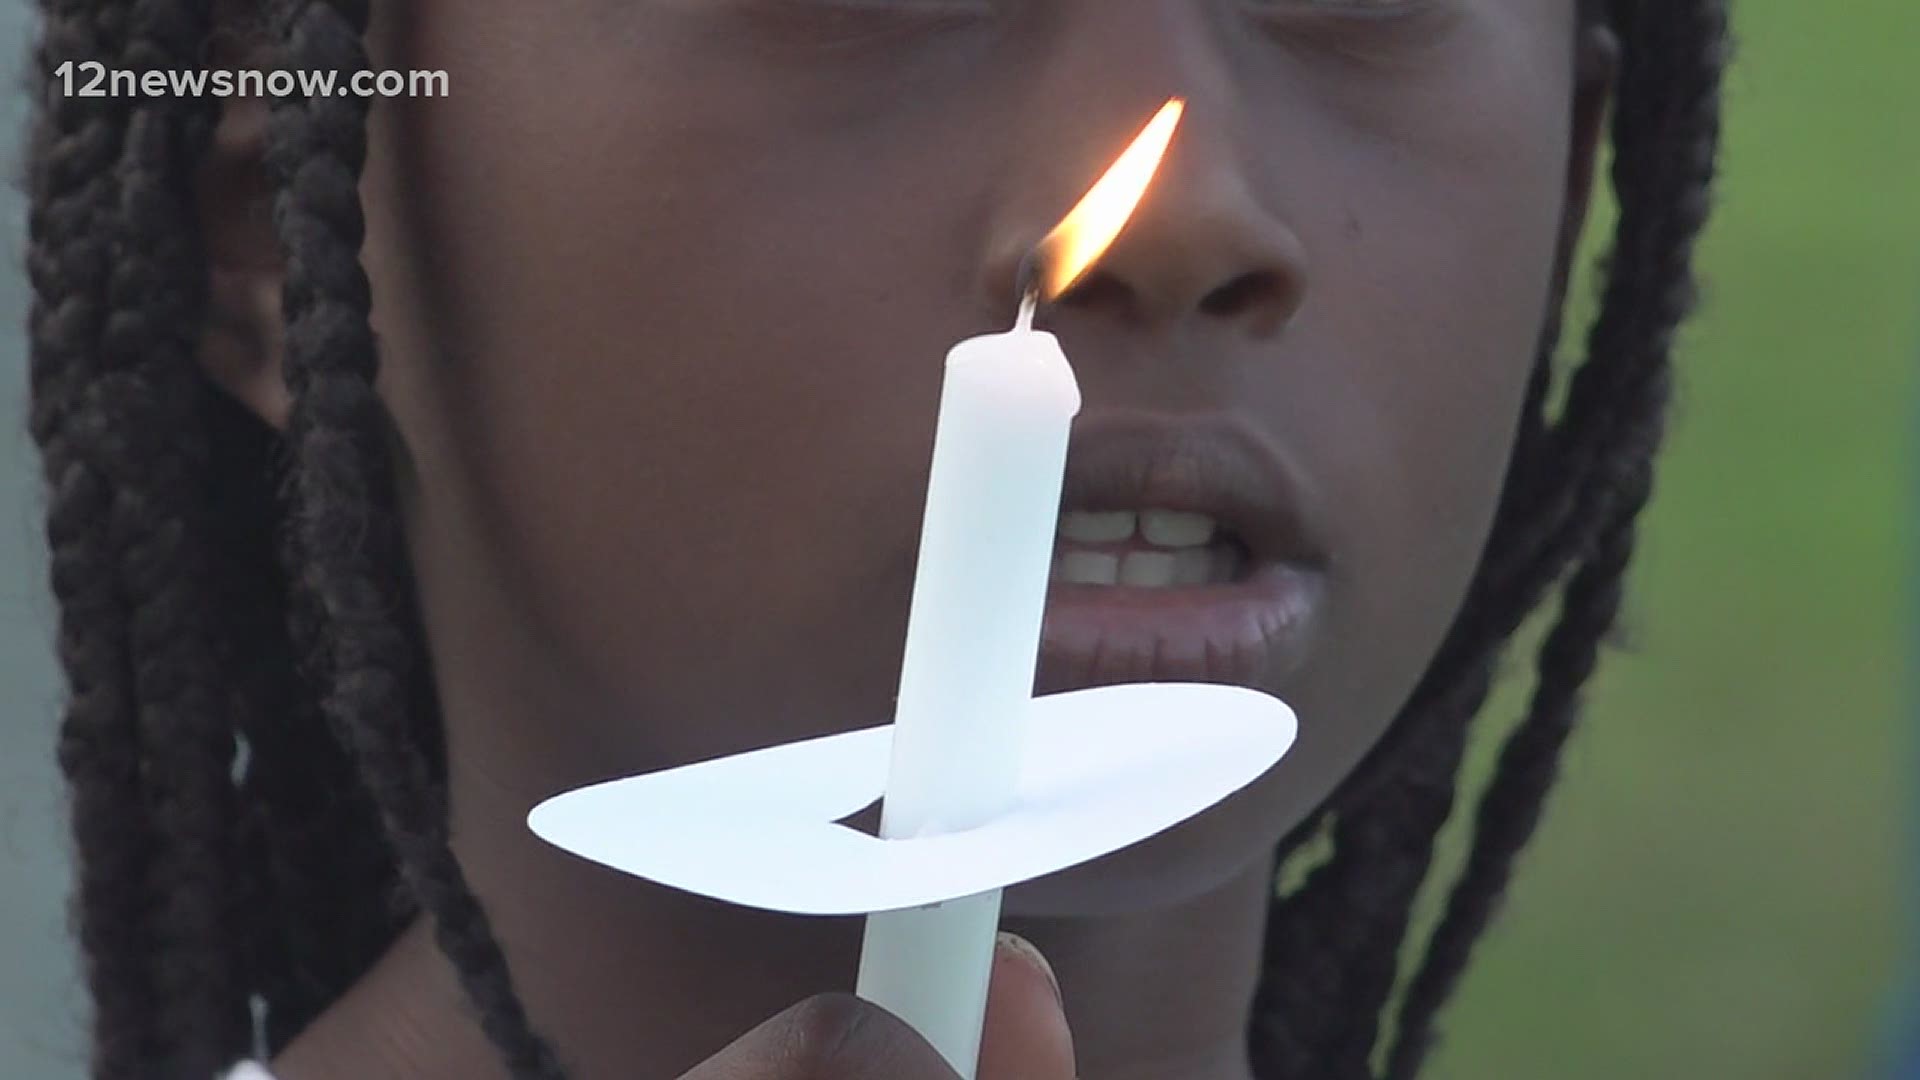 Dozens of families and friends gathered at Tyrell Park Thursday night to pray at the vigil for the 6-year-old boy.